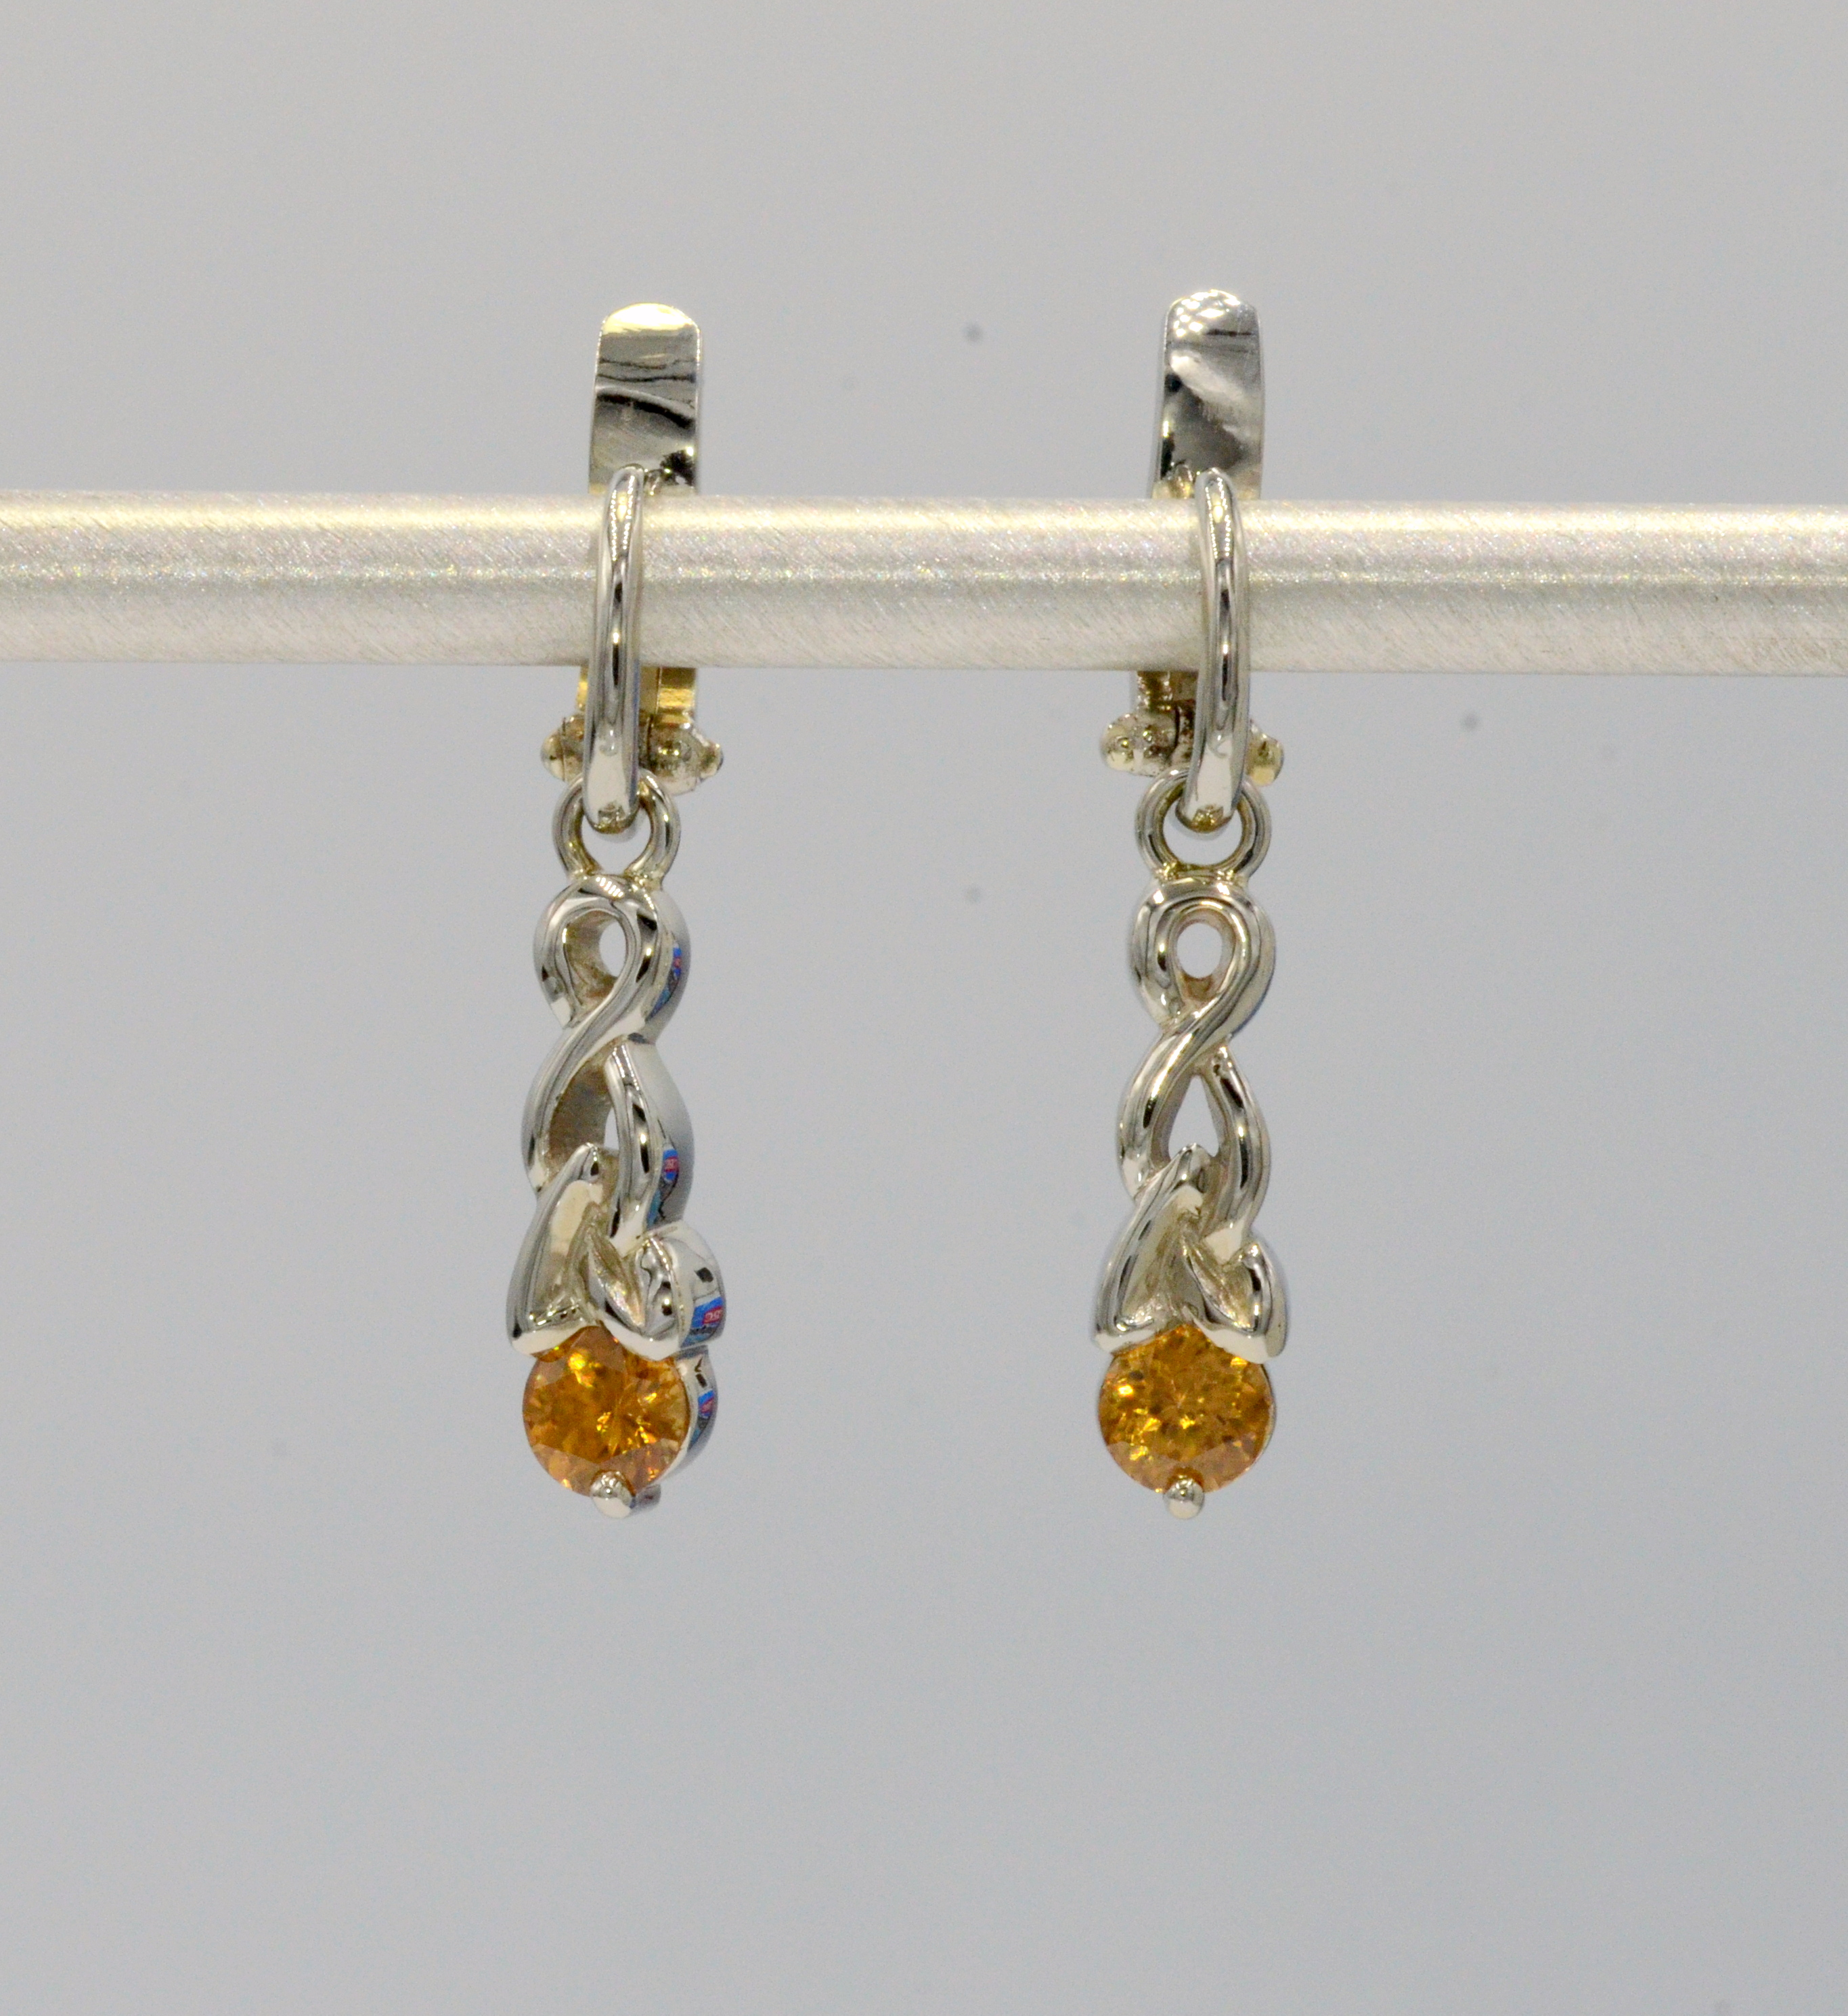 Classic braided design accented with a rich Honey Colored Citrine. 3/4 inch long.  These earrings are worn with our Euro Wire Earrings which are sold separately. Go to About page for further description of Euro Wire Earrings.